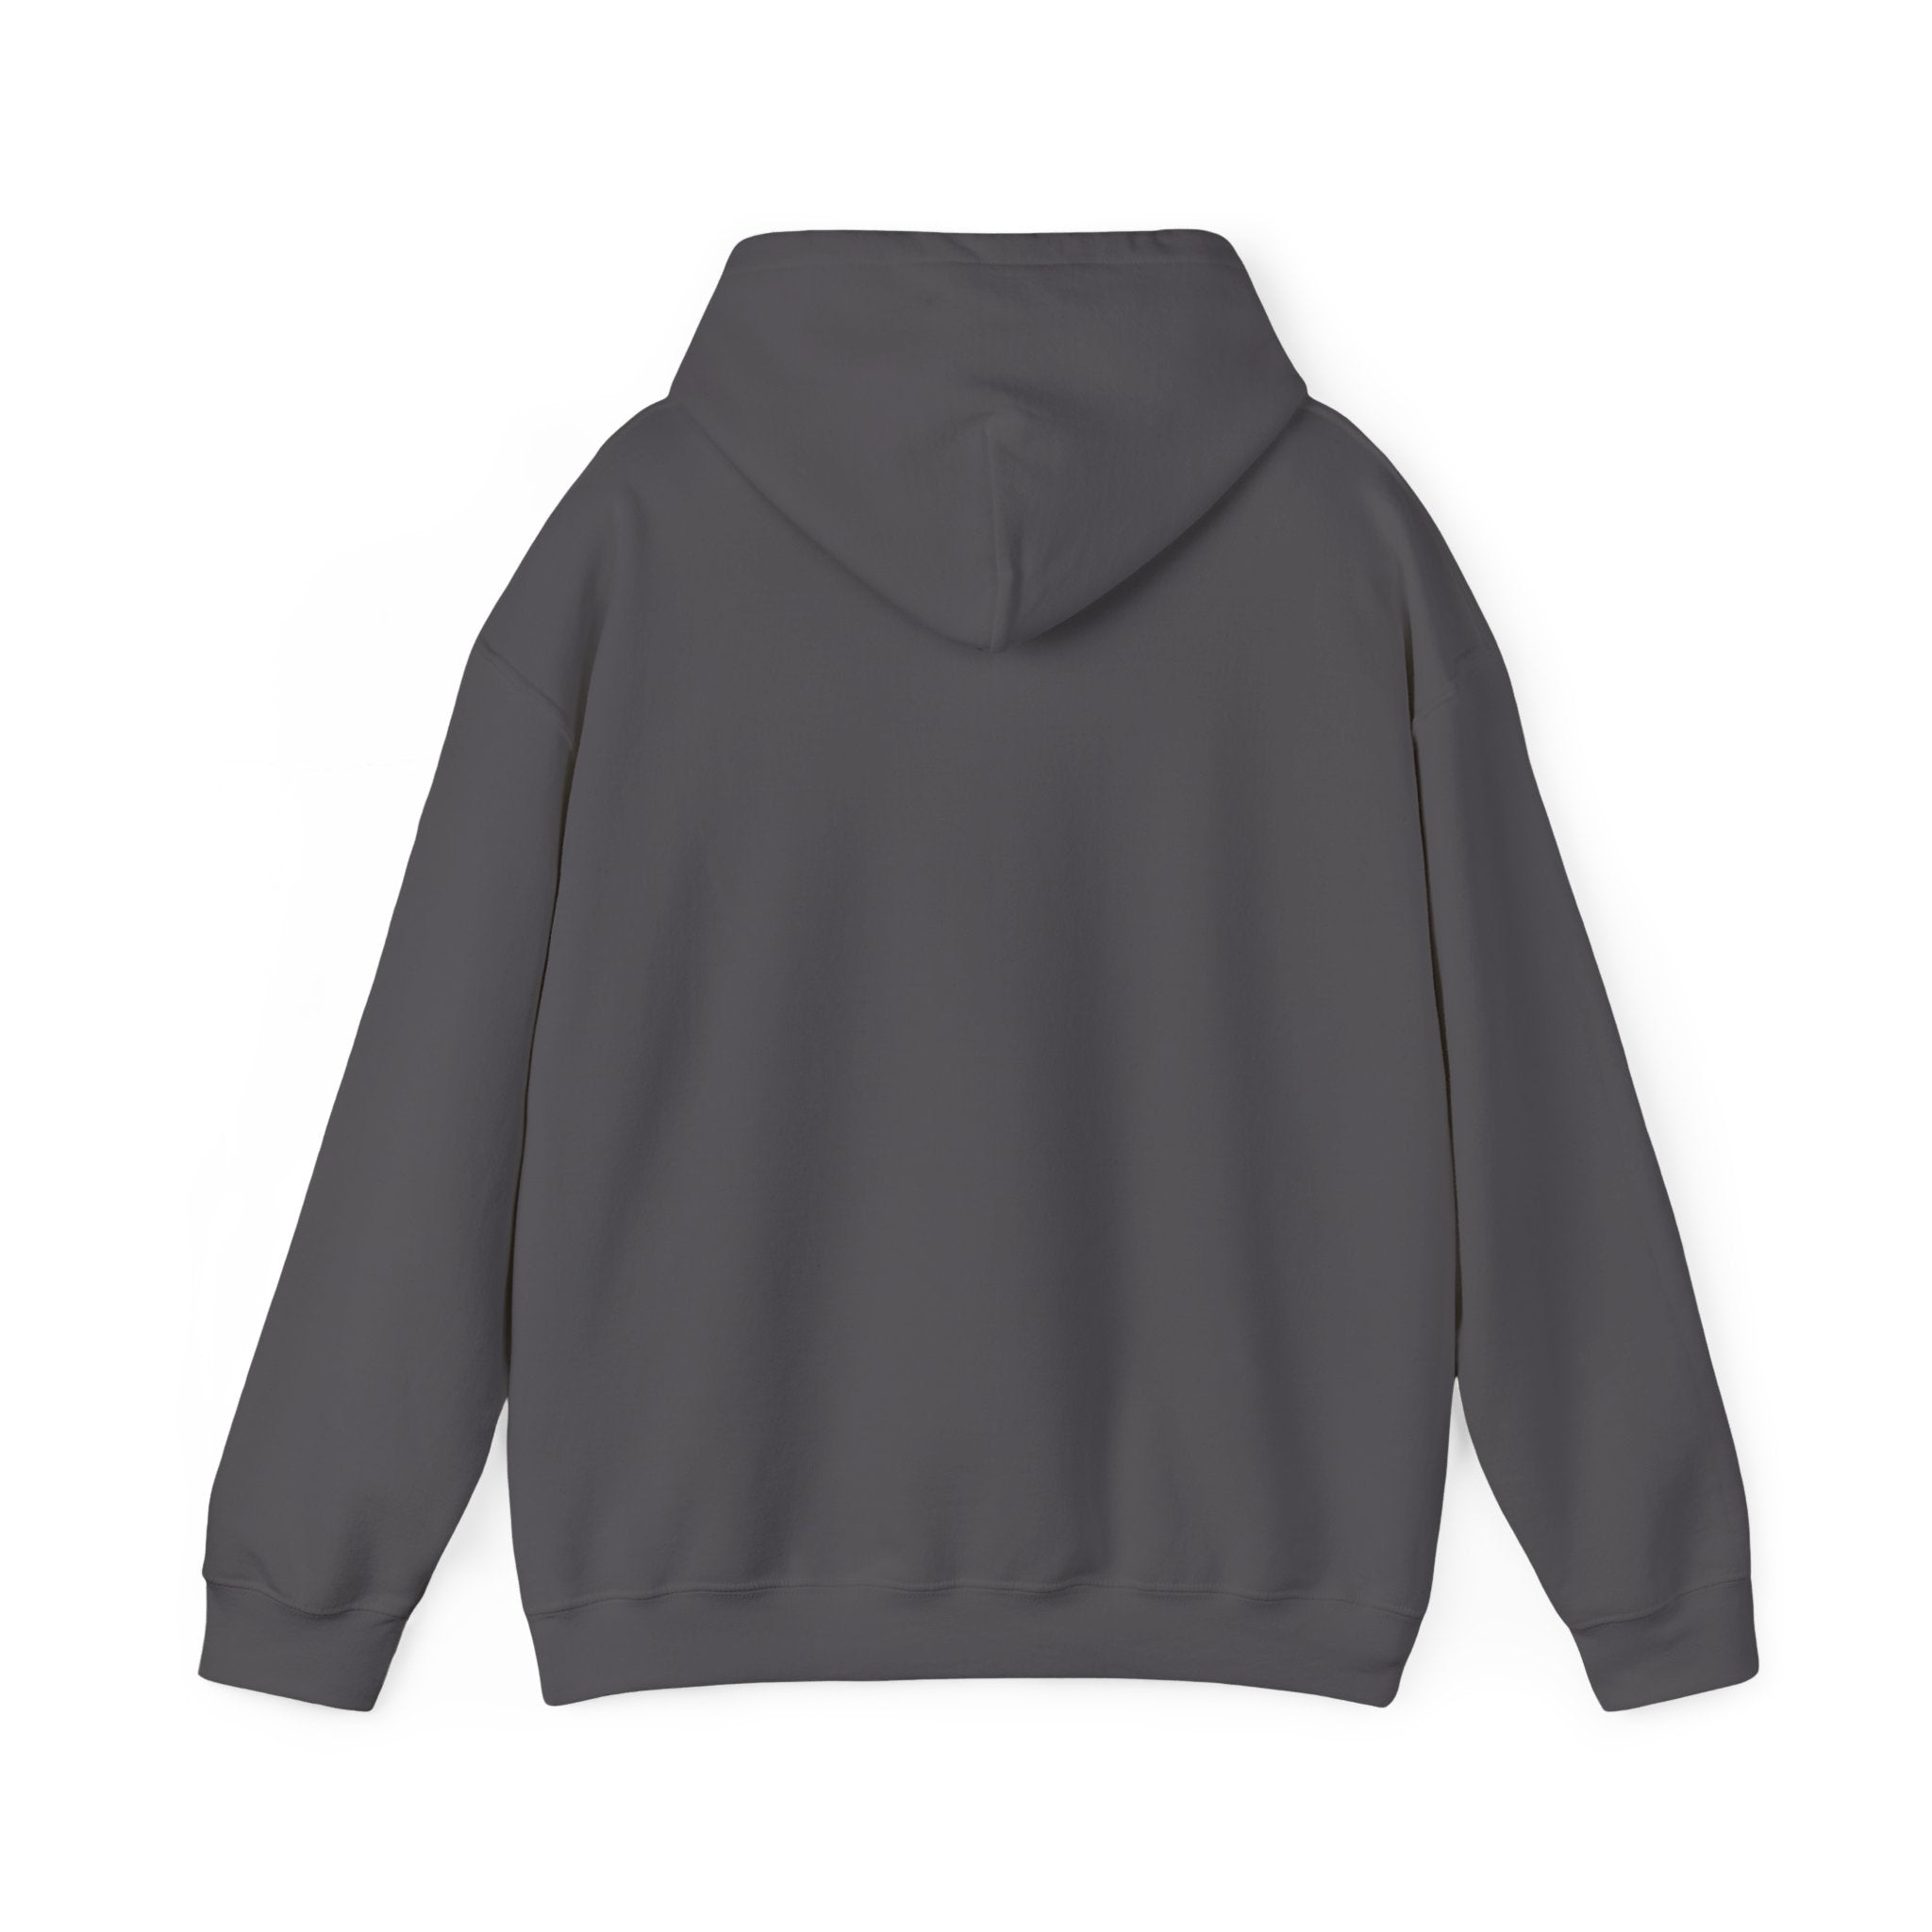 Back view of the RU - Hooded Sweatshirt in plain dark gray with long sleeves and a hood, offering ultimate comfort and style against a white background.